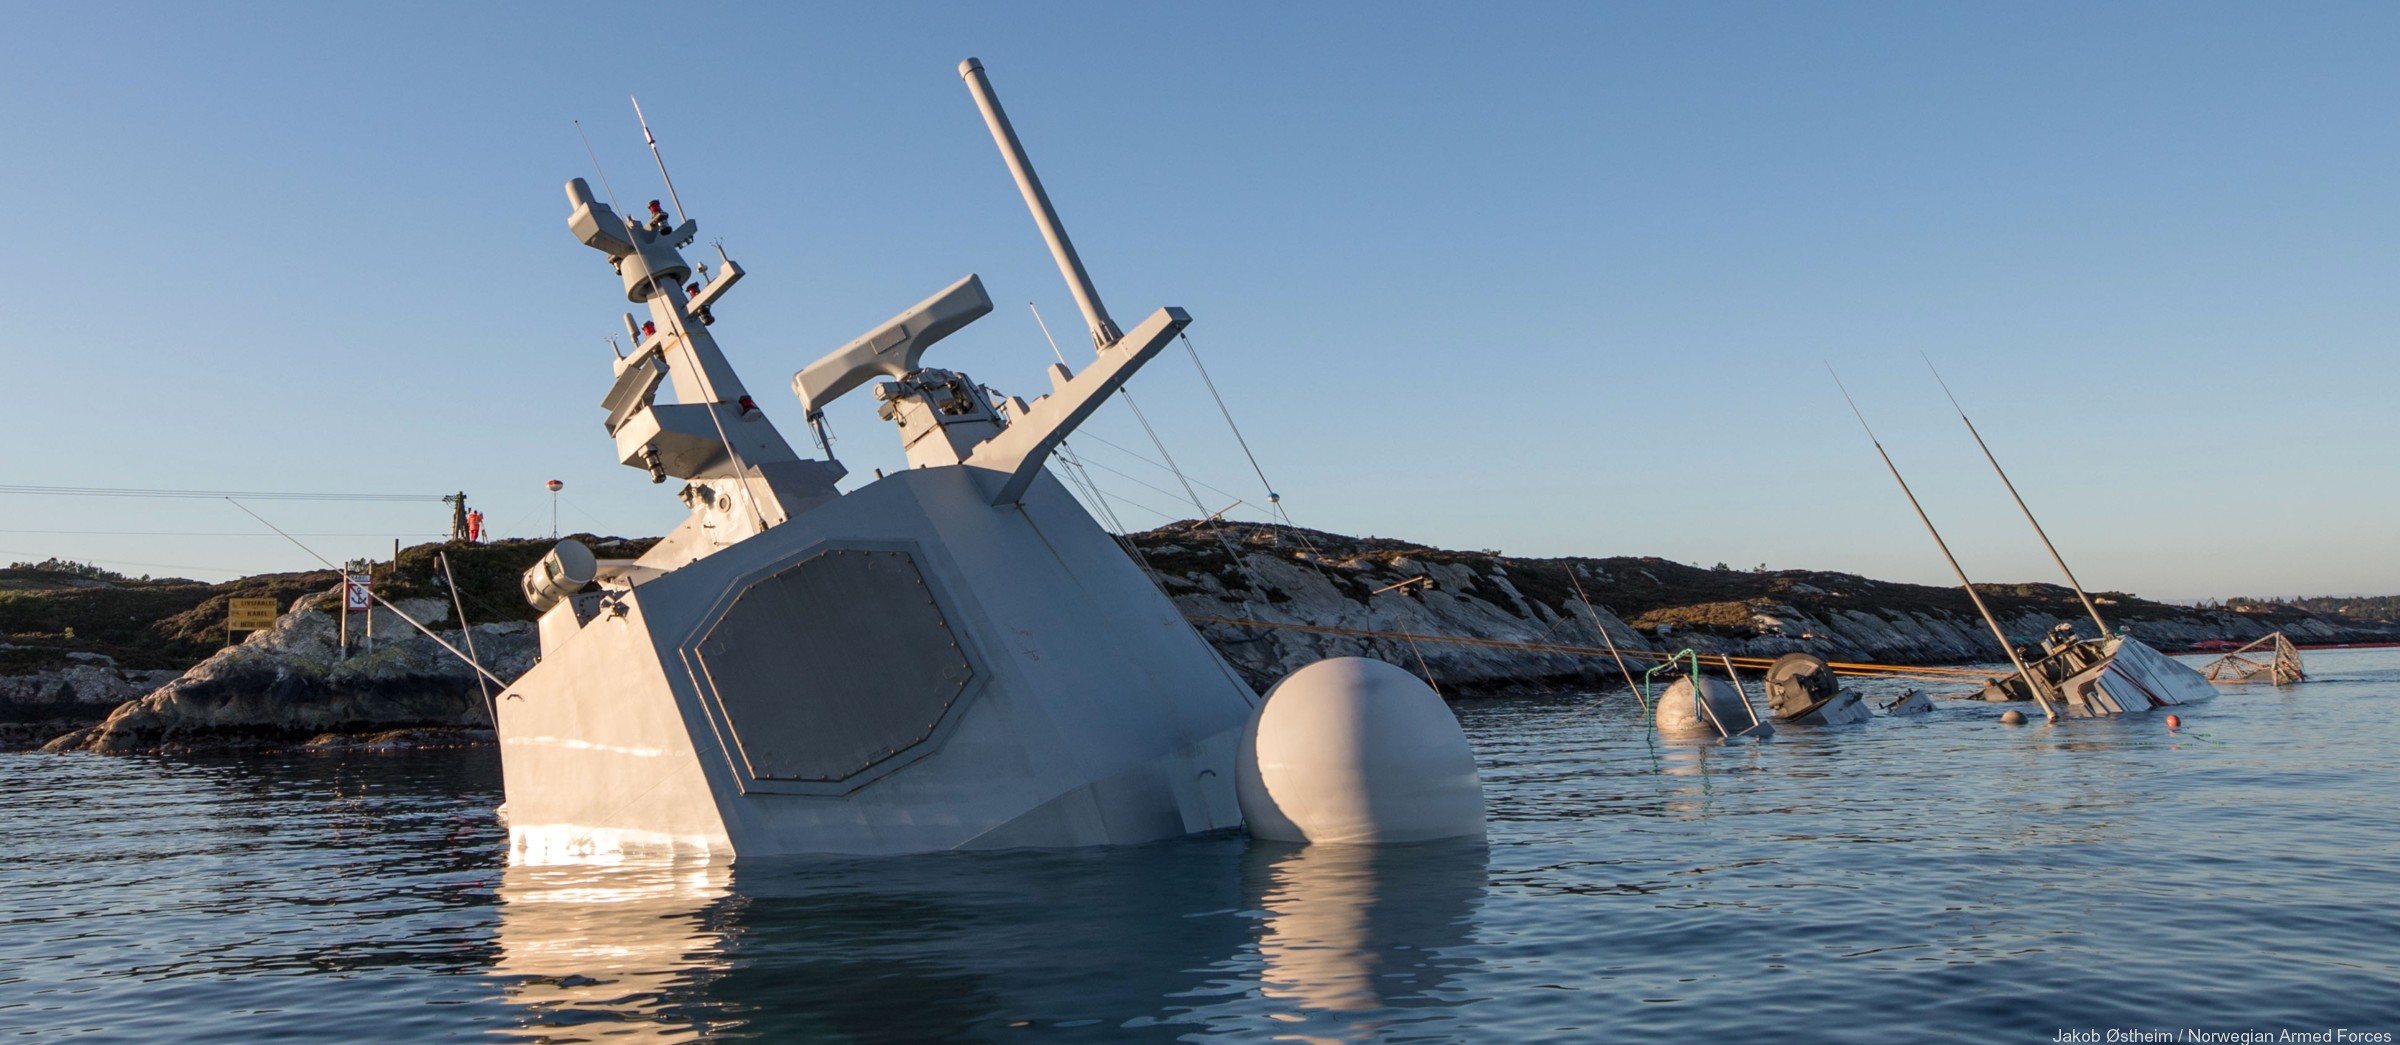 f-313 helge ingstad hnoms knm nansen class frigate royal norwegian navy 12 sunk beached nato exercise trident juncture